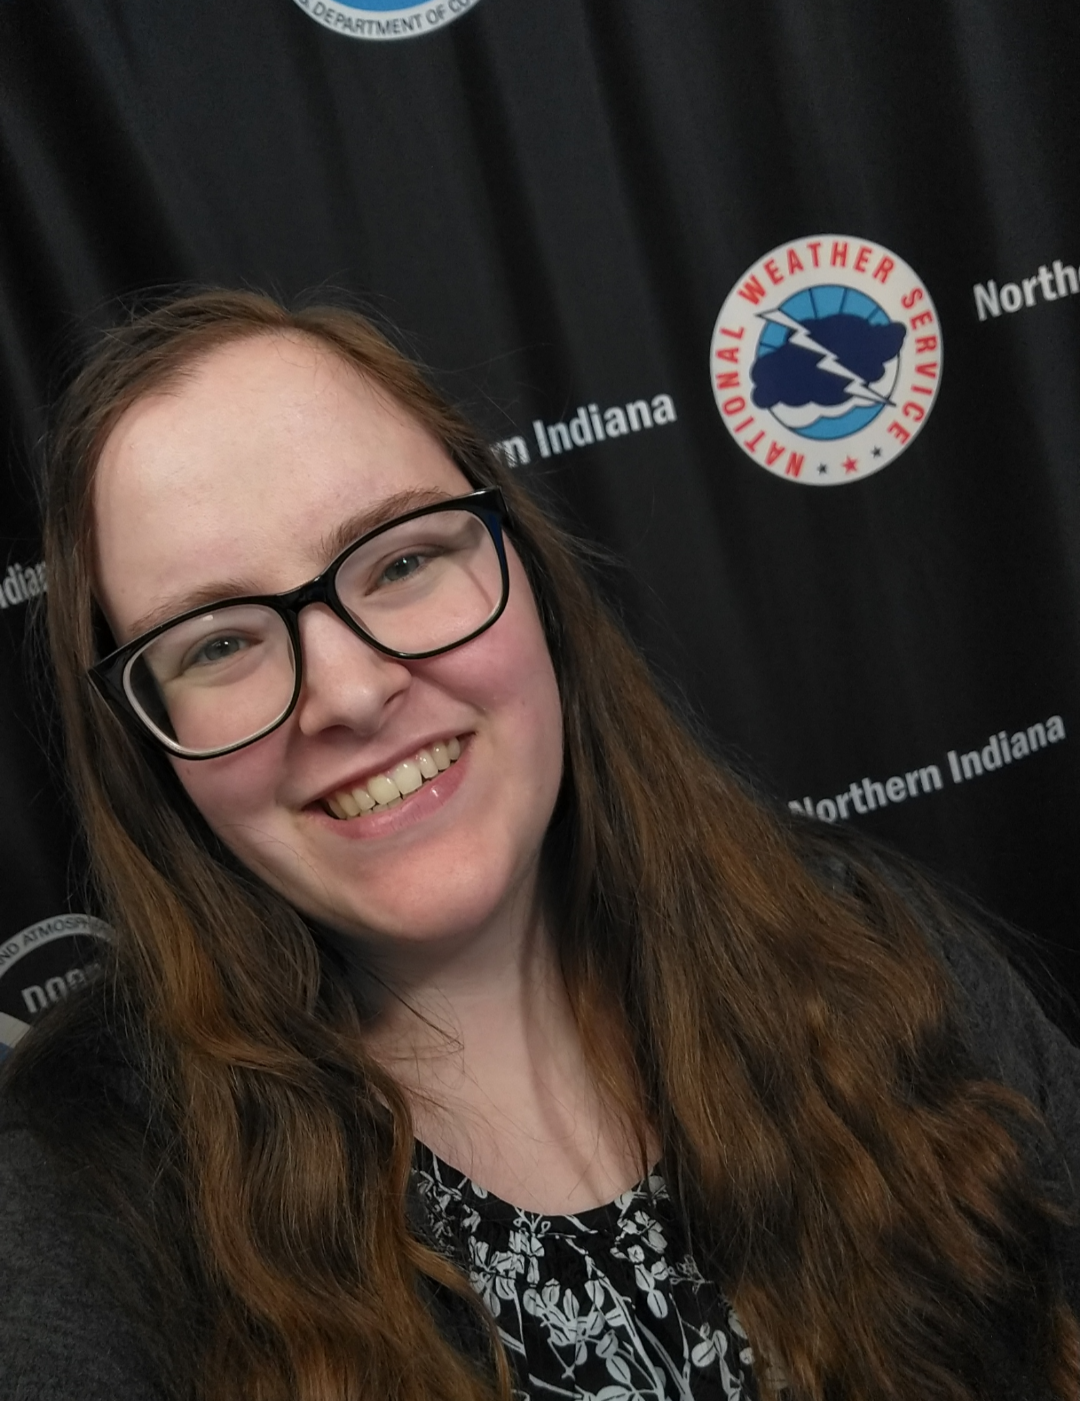 Maddi Johnson, a meteorologist with the National Weather Service Northern Indiana Office